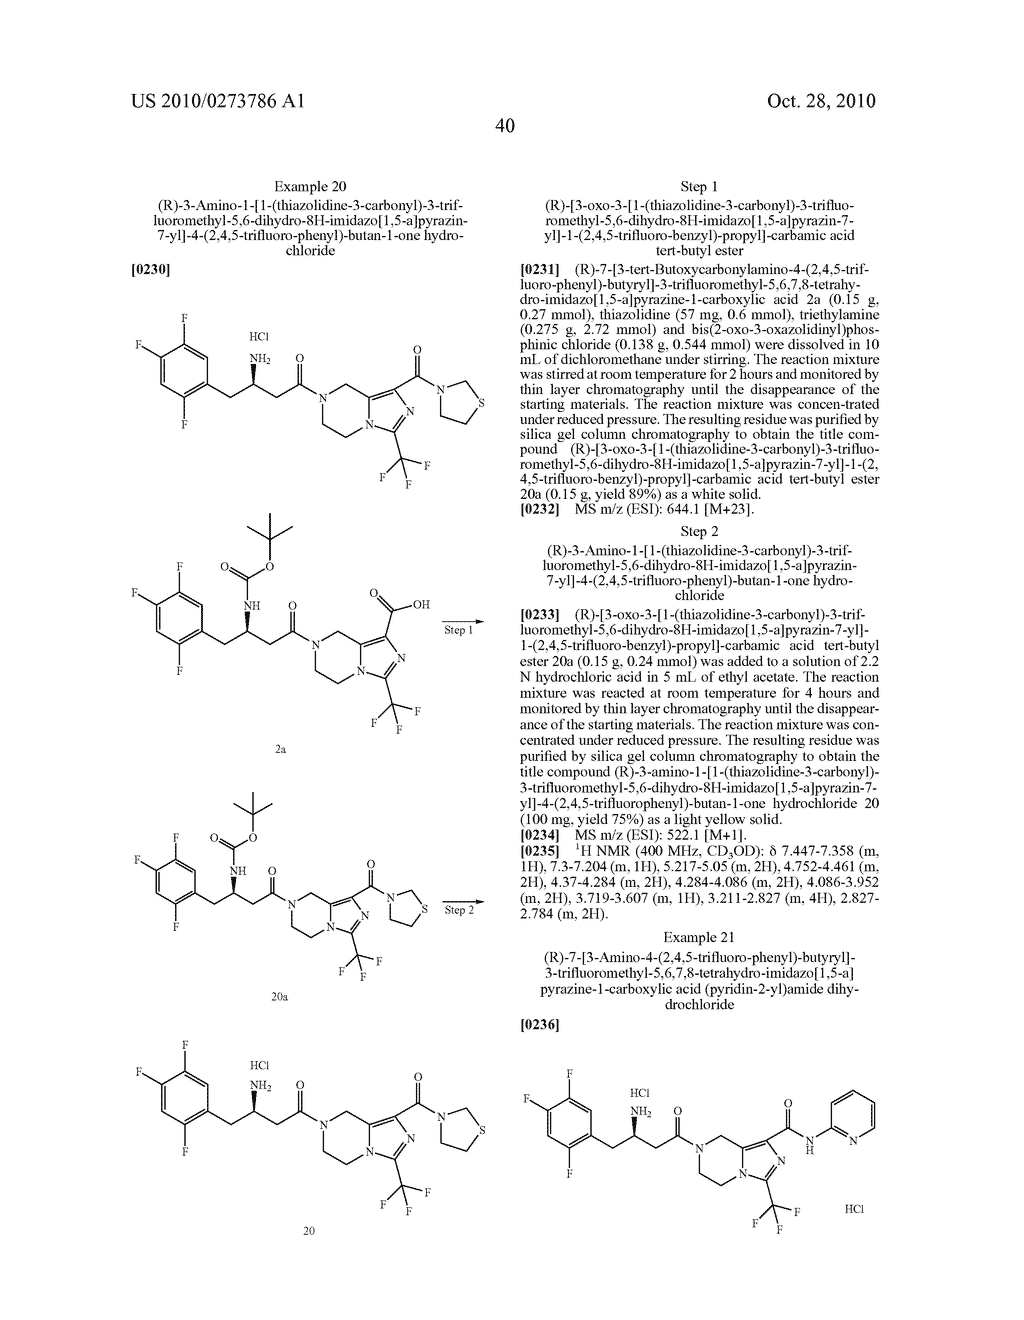 TETRAHYDRO-IMIDAZ0[1,5-A]PYRAZINE DERIVATIVES, PREPARATION PROCESS AND MEDICINAL USE THEREOF - diagram, schematic, and image 41